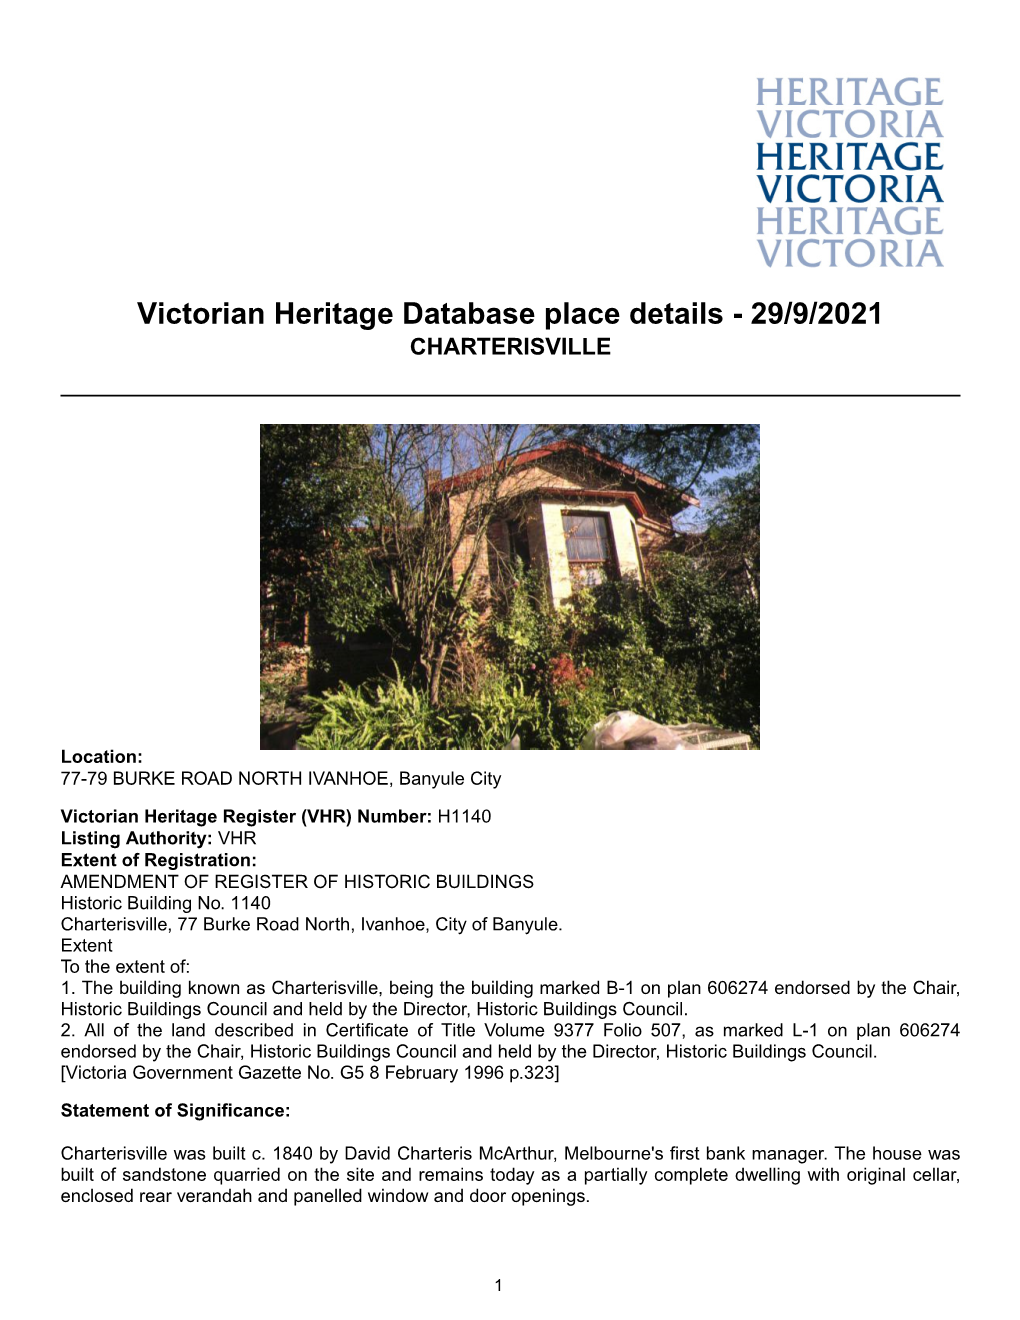 Victorian Heritage Database Place Details - 29/9/2021 CHARTERISVILLE